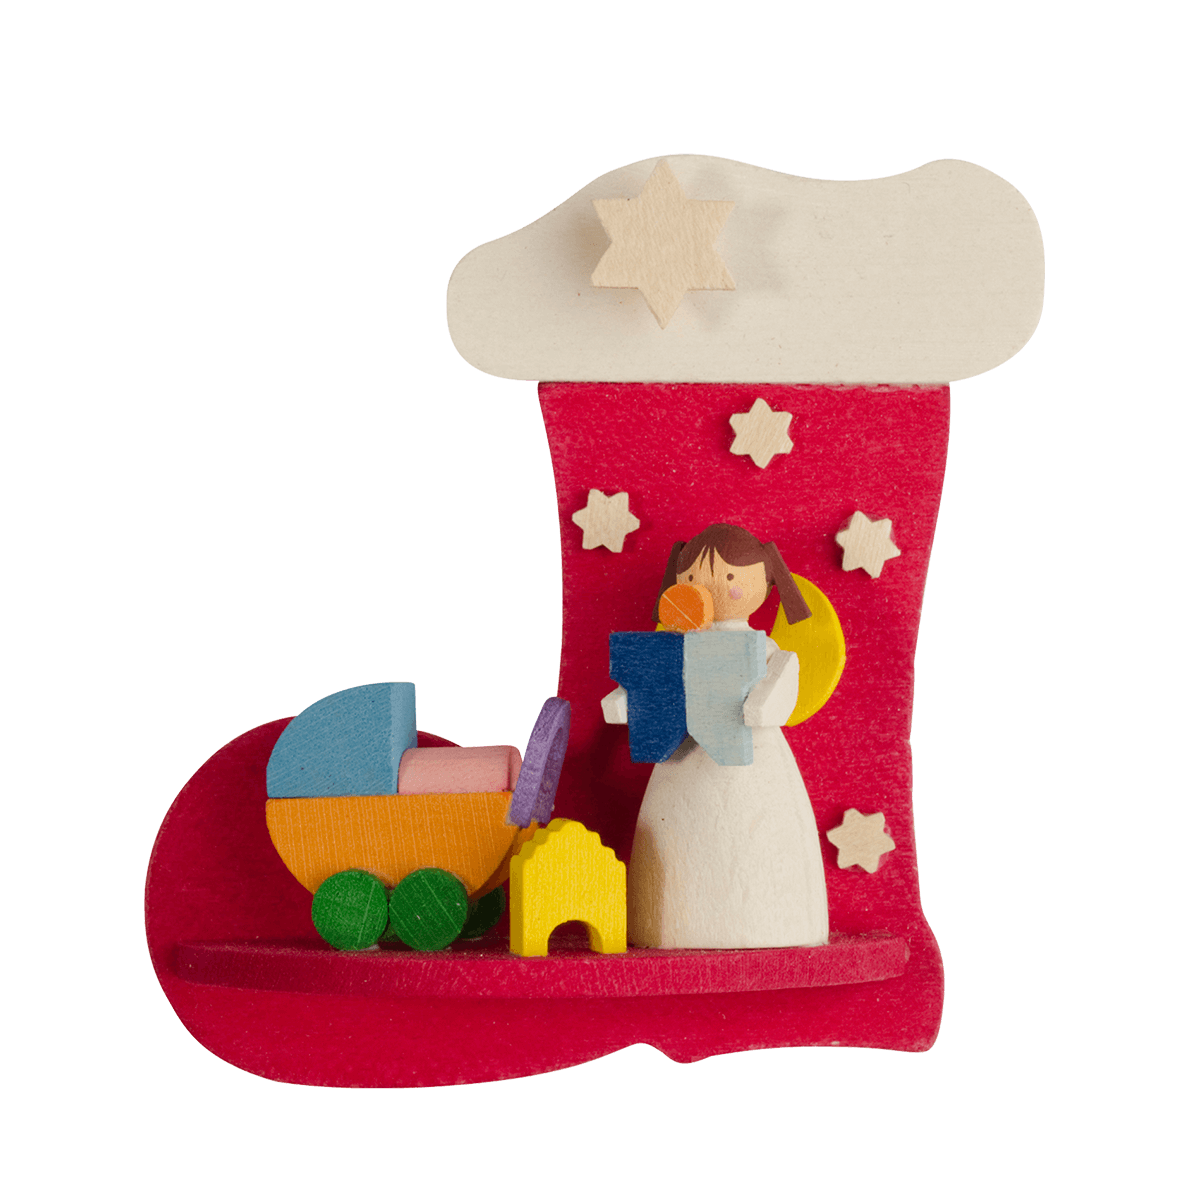 Boot 'Angel' Ornament with doll carriage